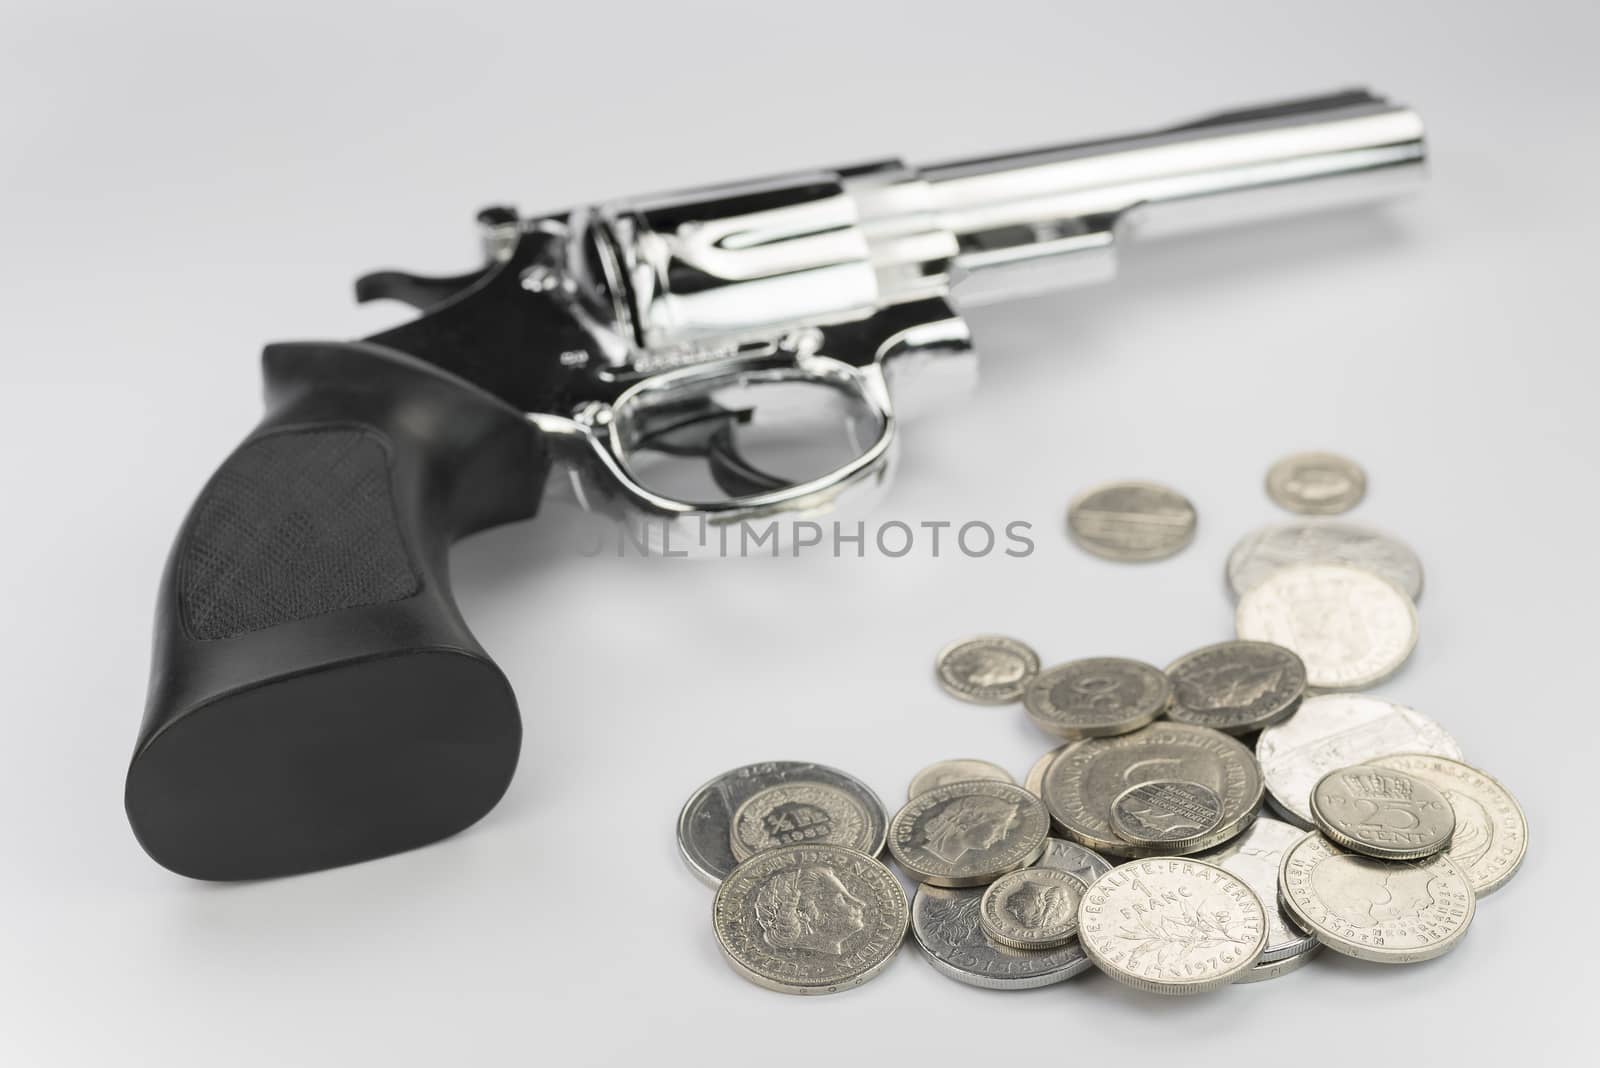 Conceptual representation of obtained money through criminal activities as a background picture.
